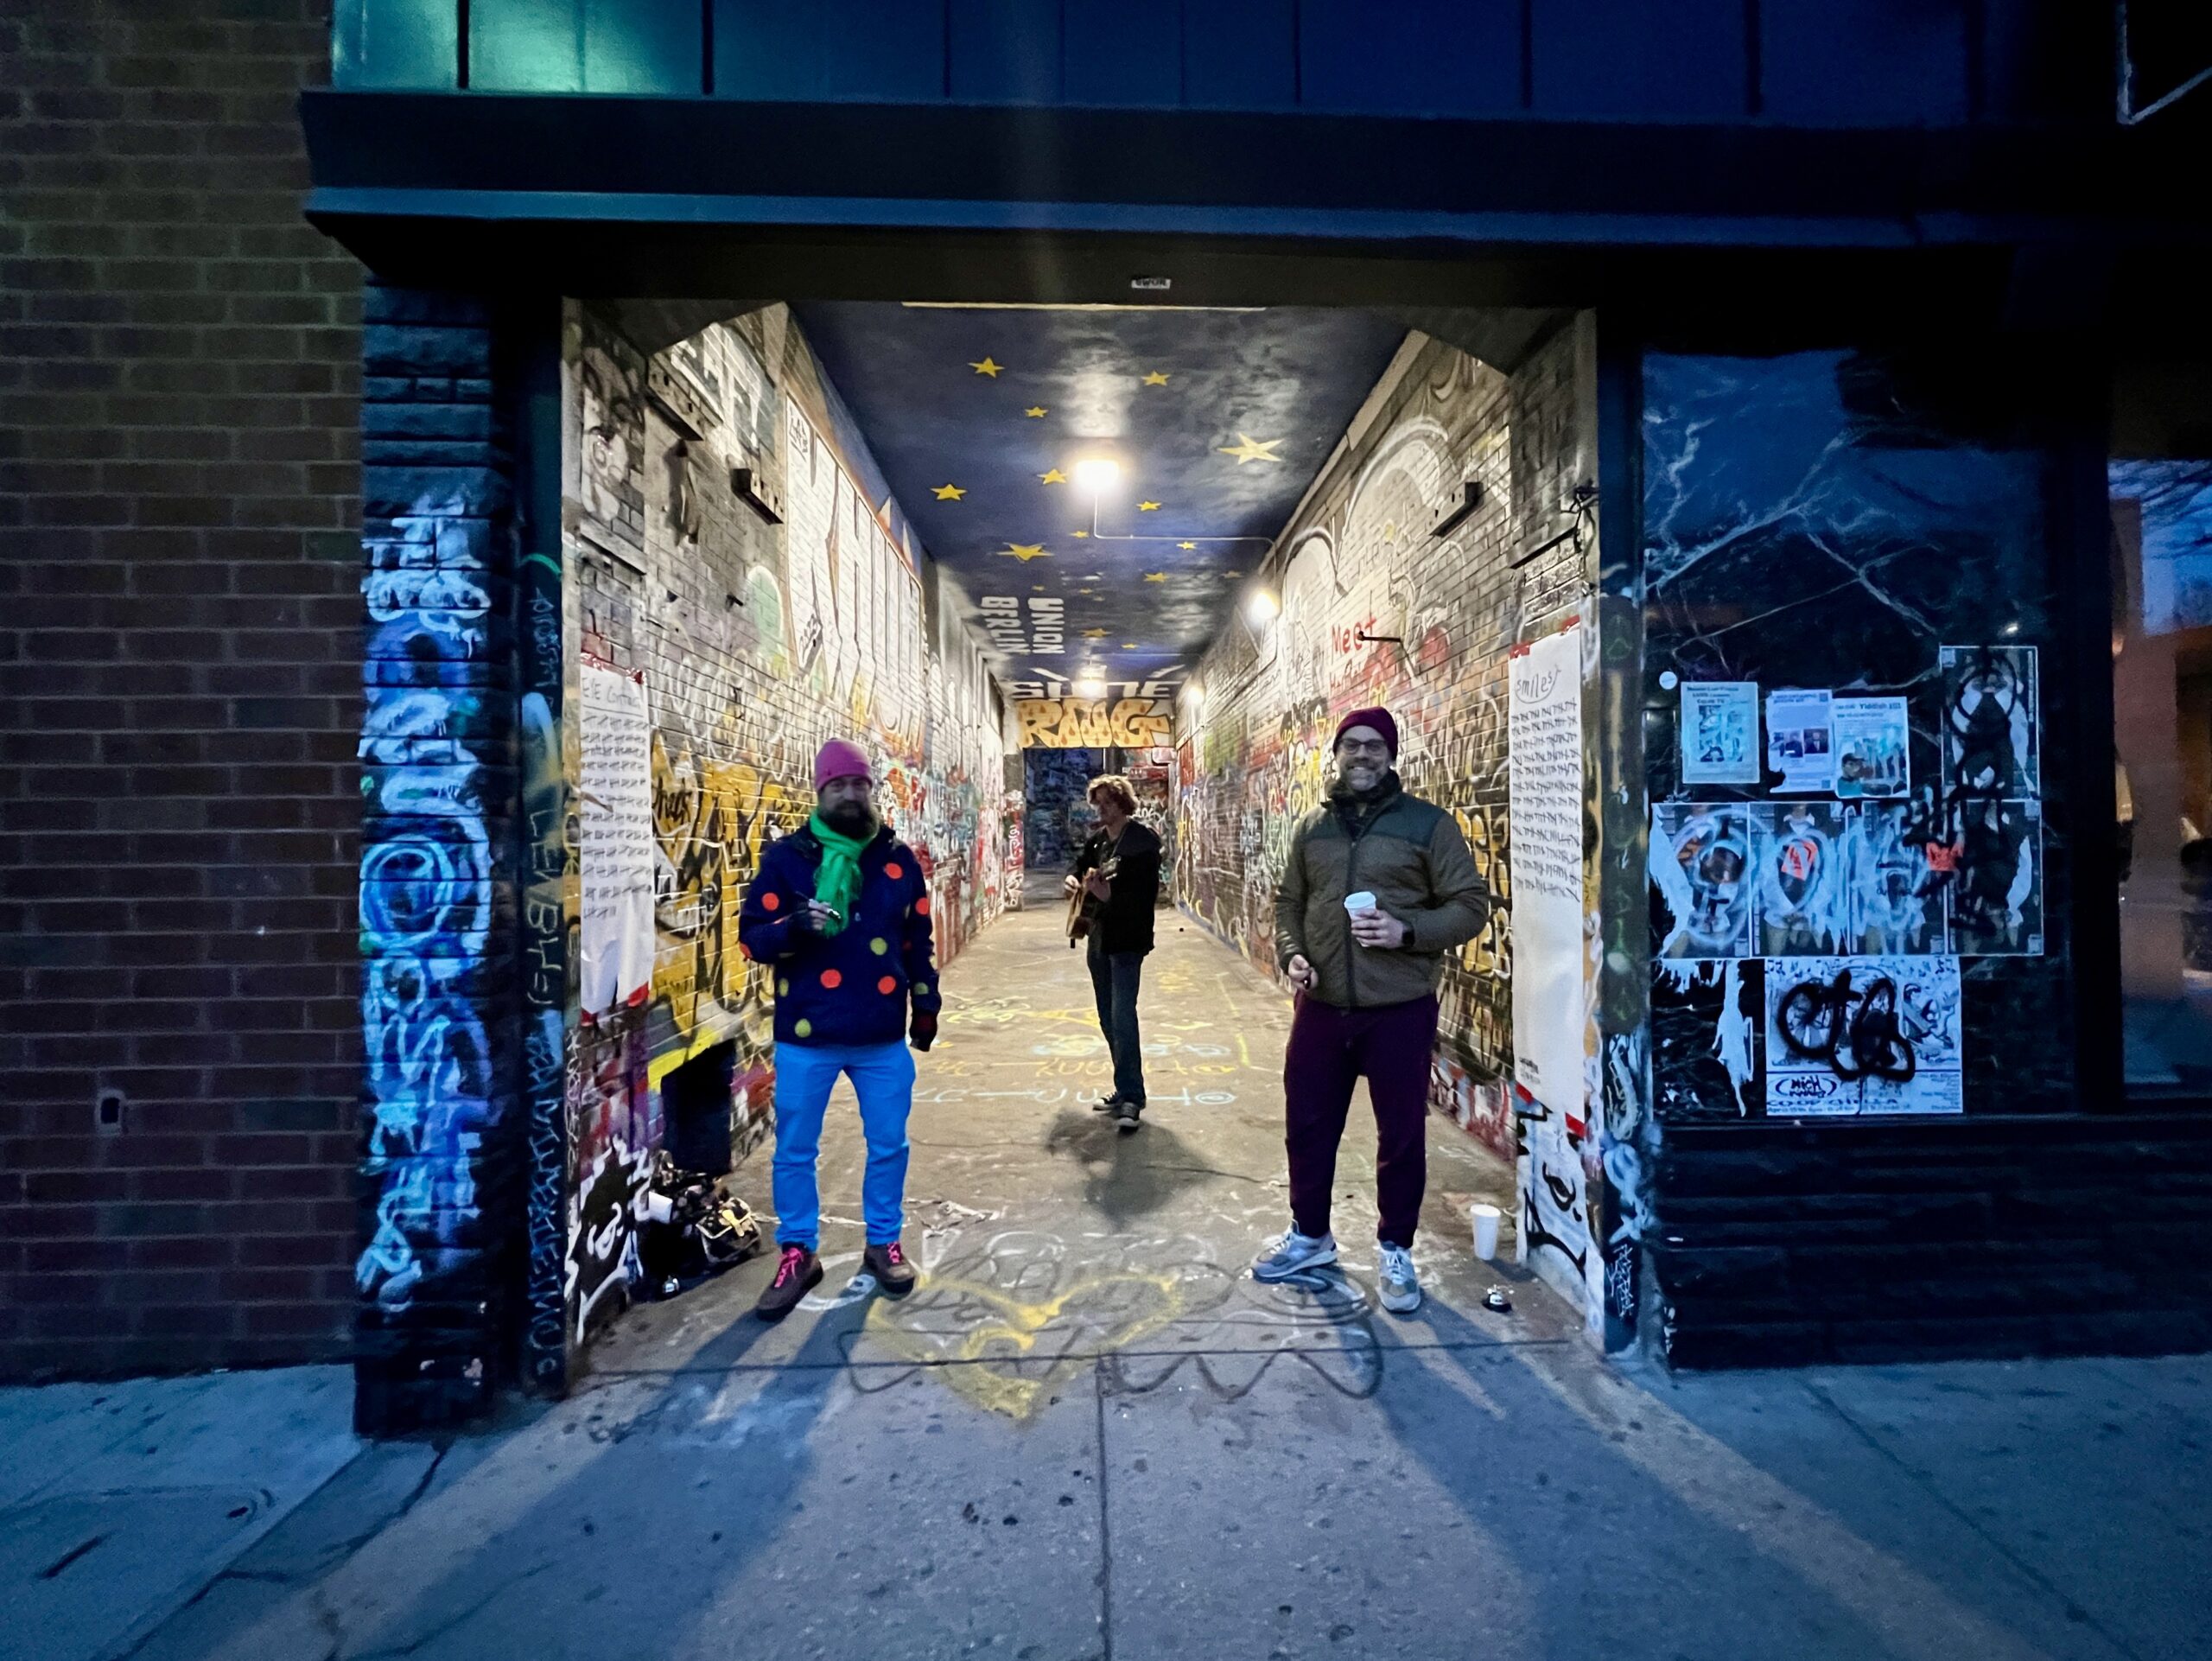 Three men stand in an alley full of graffiti at night, with two pieces of paper, one on either side of the alleyway.